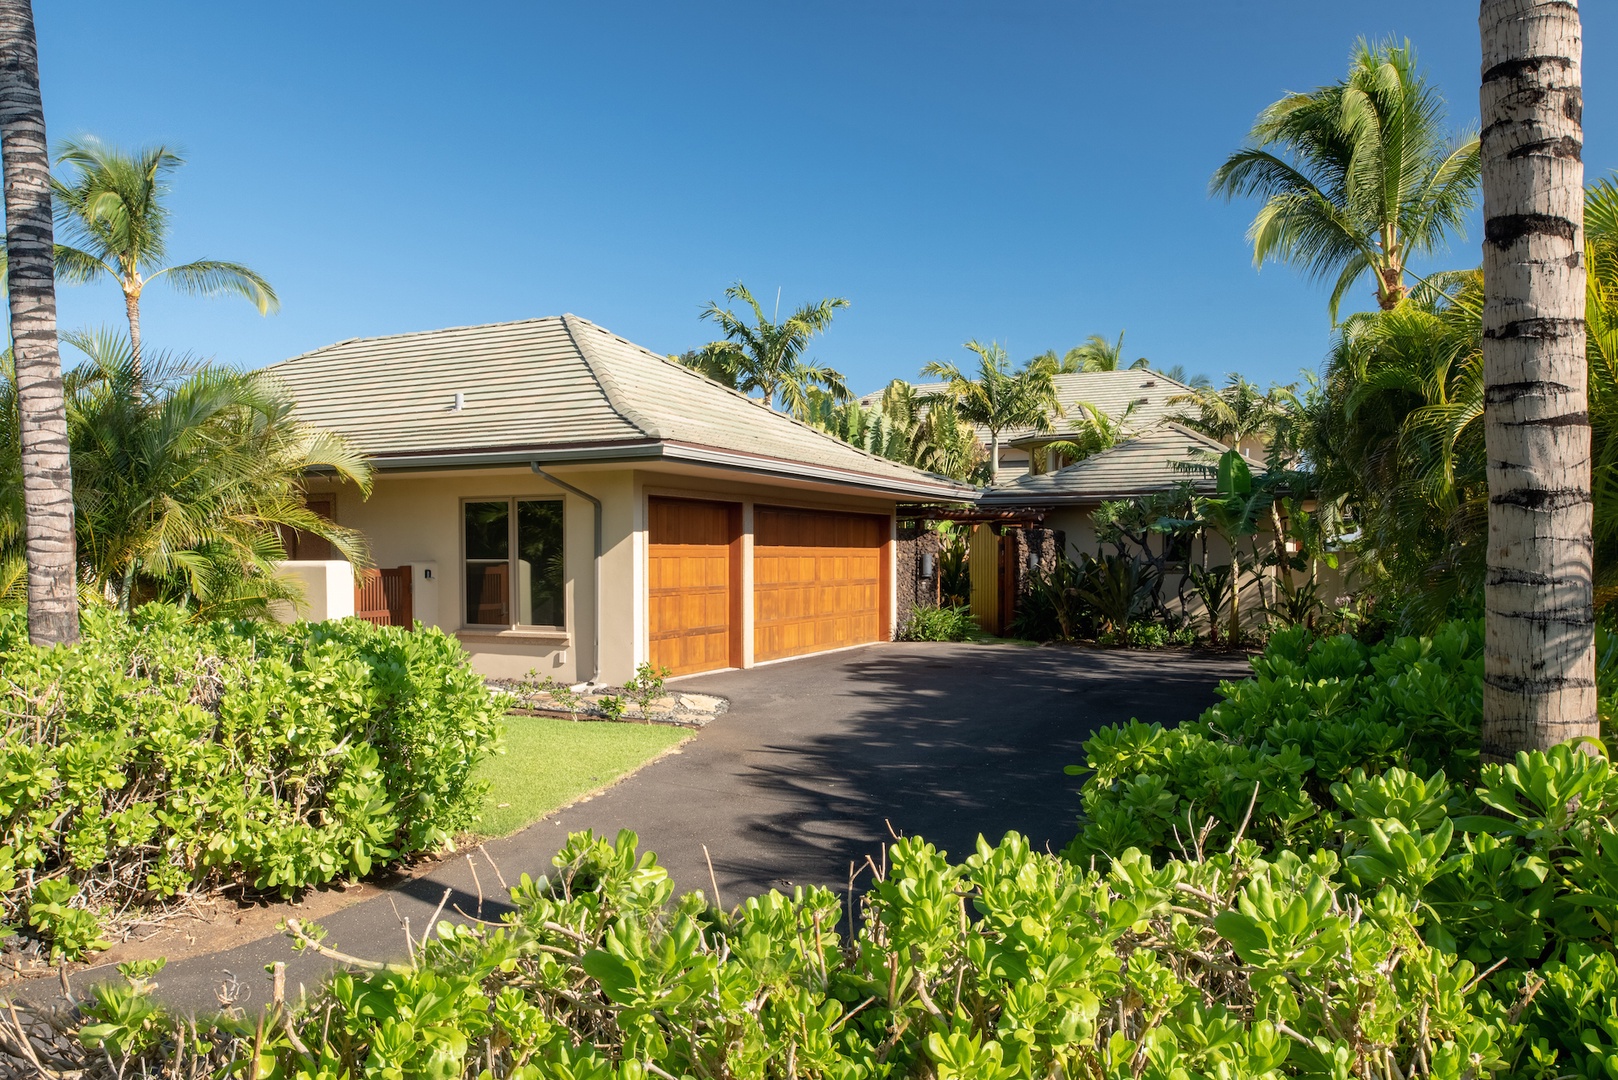 Kamuela Vacation Rentals, 3BD OneOcean (1C) at Mauna Lani Resort - Ample Private Parking in the Home's Driveway and Garage